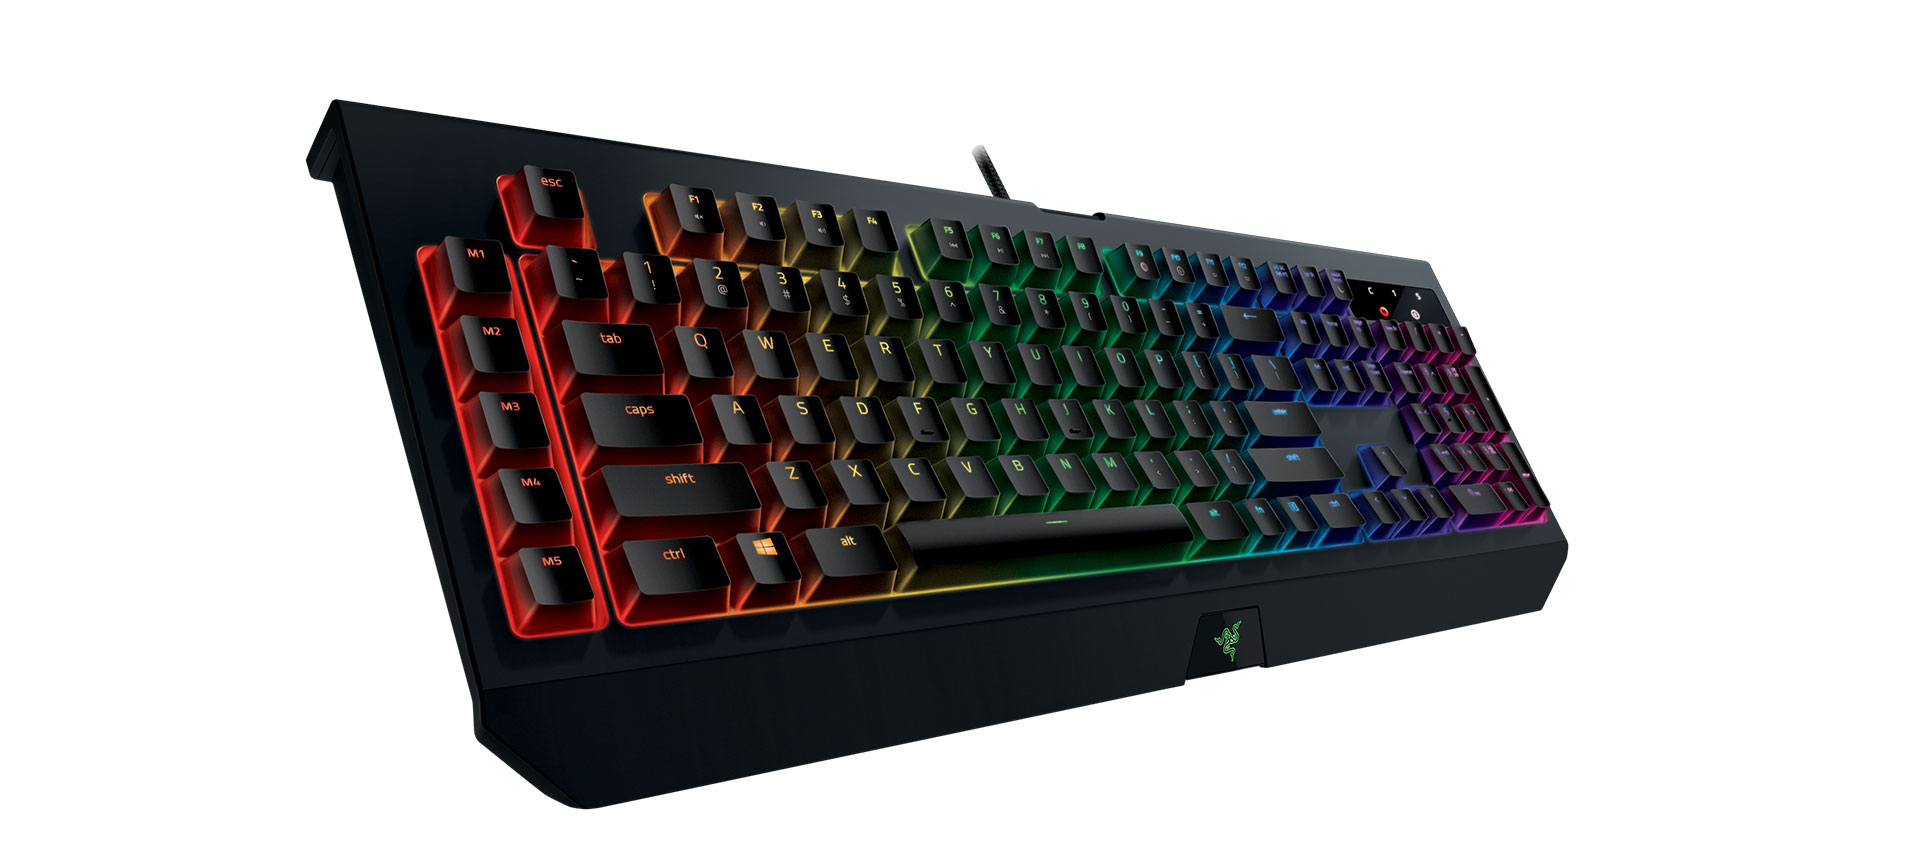 Razer’s Most Popular Gaming Keyboard Gets A Wrist Rest And Fancy New Switches